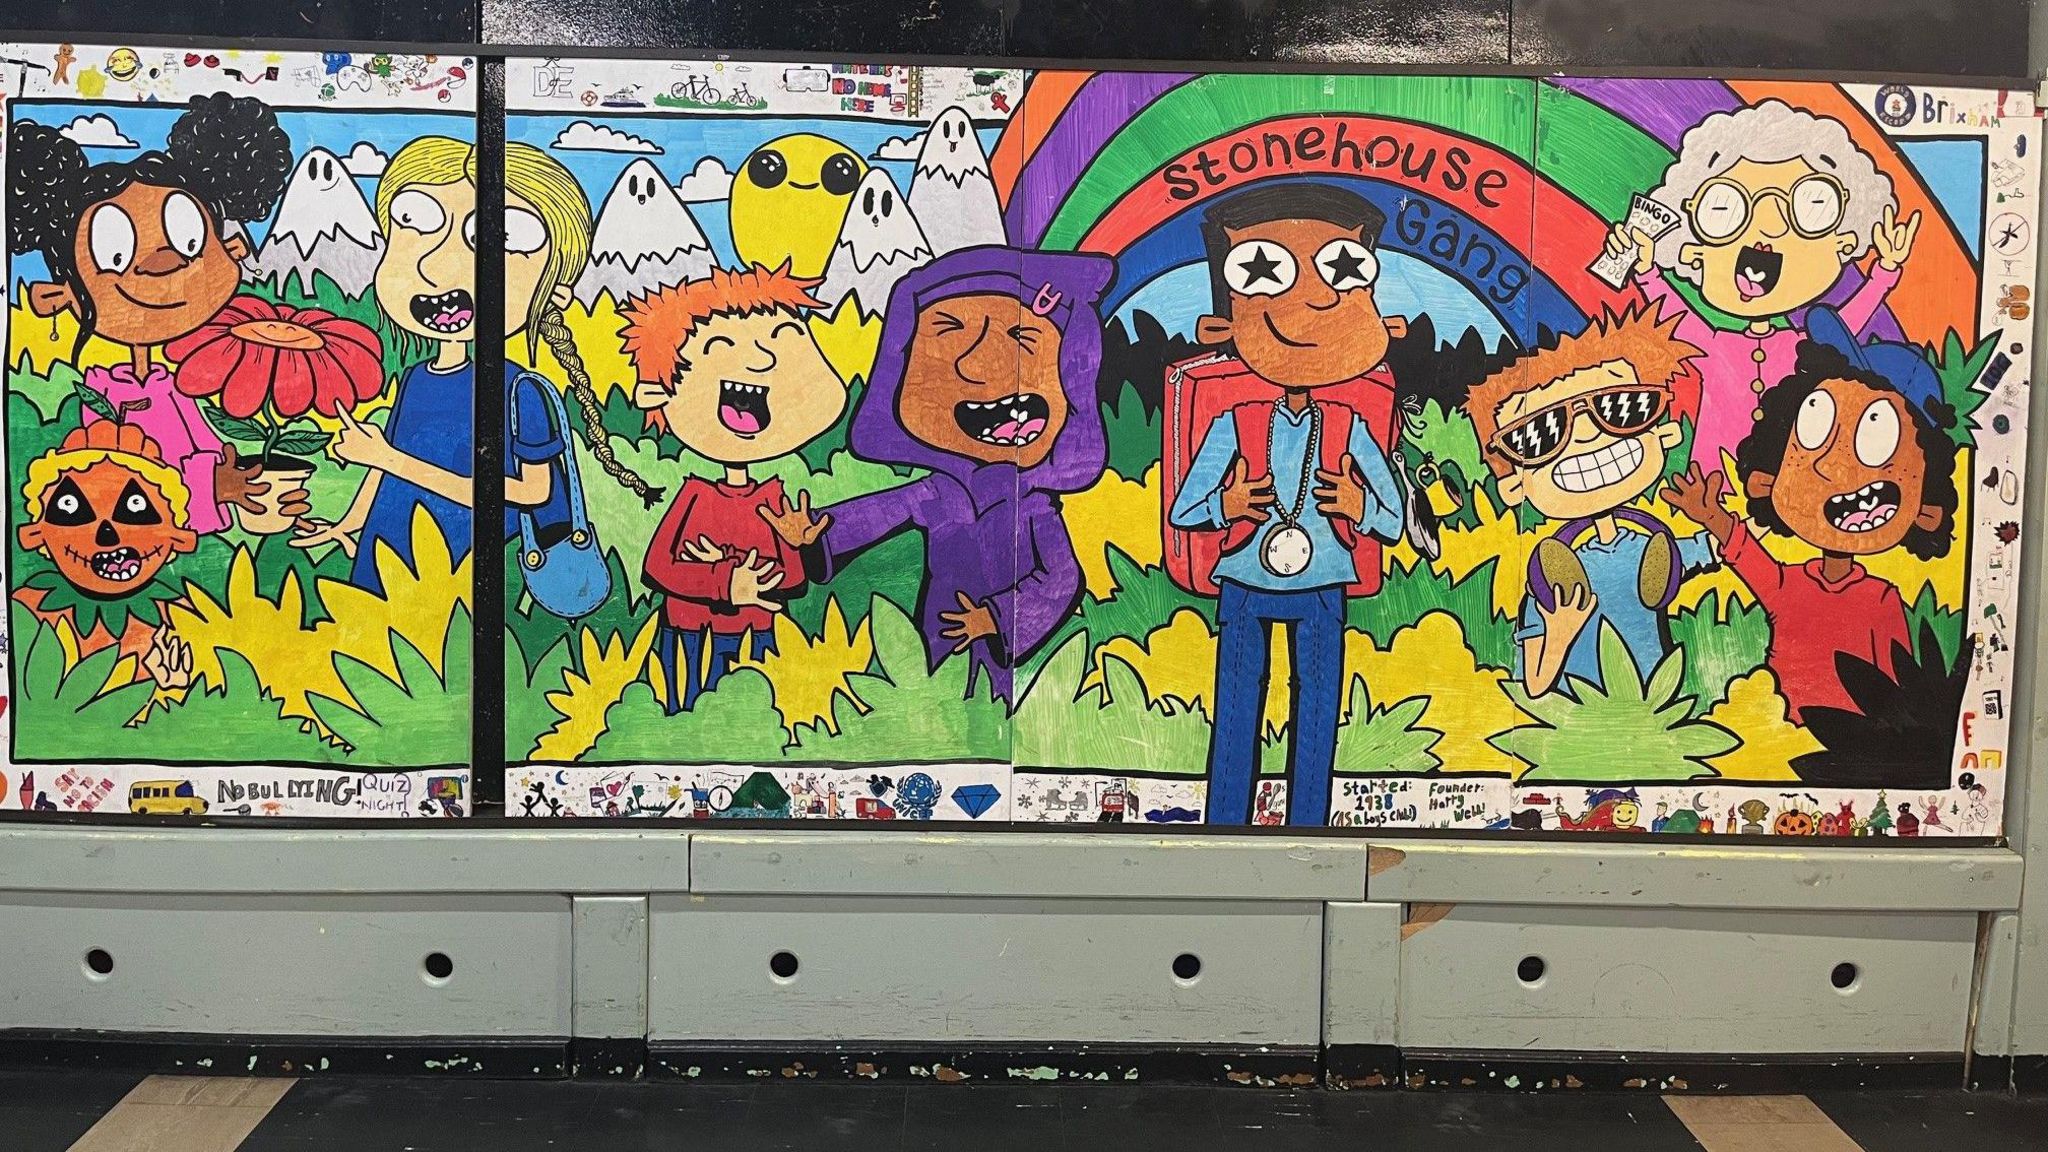 A mural of The Stonehouse Gang